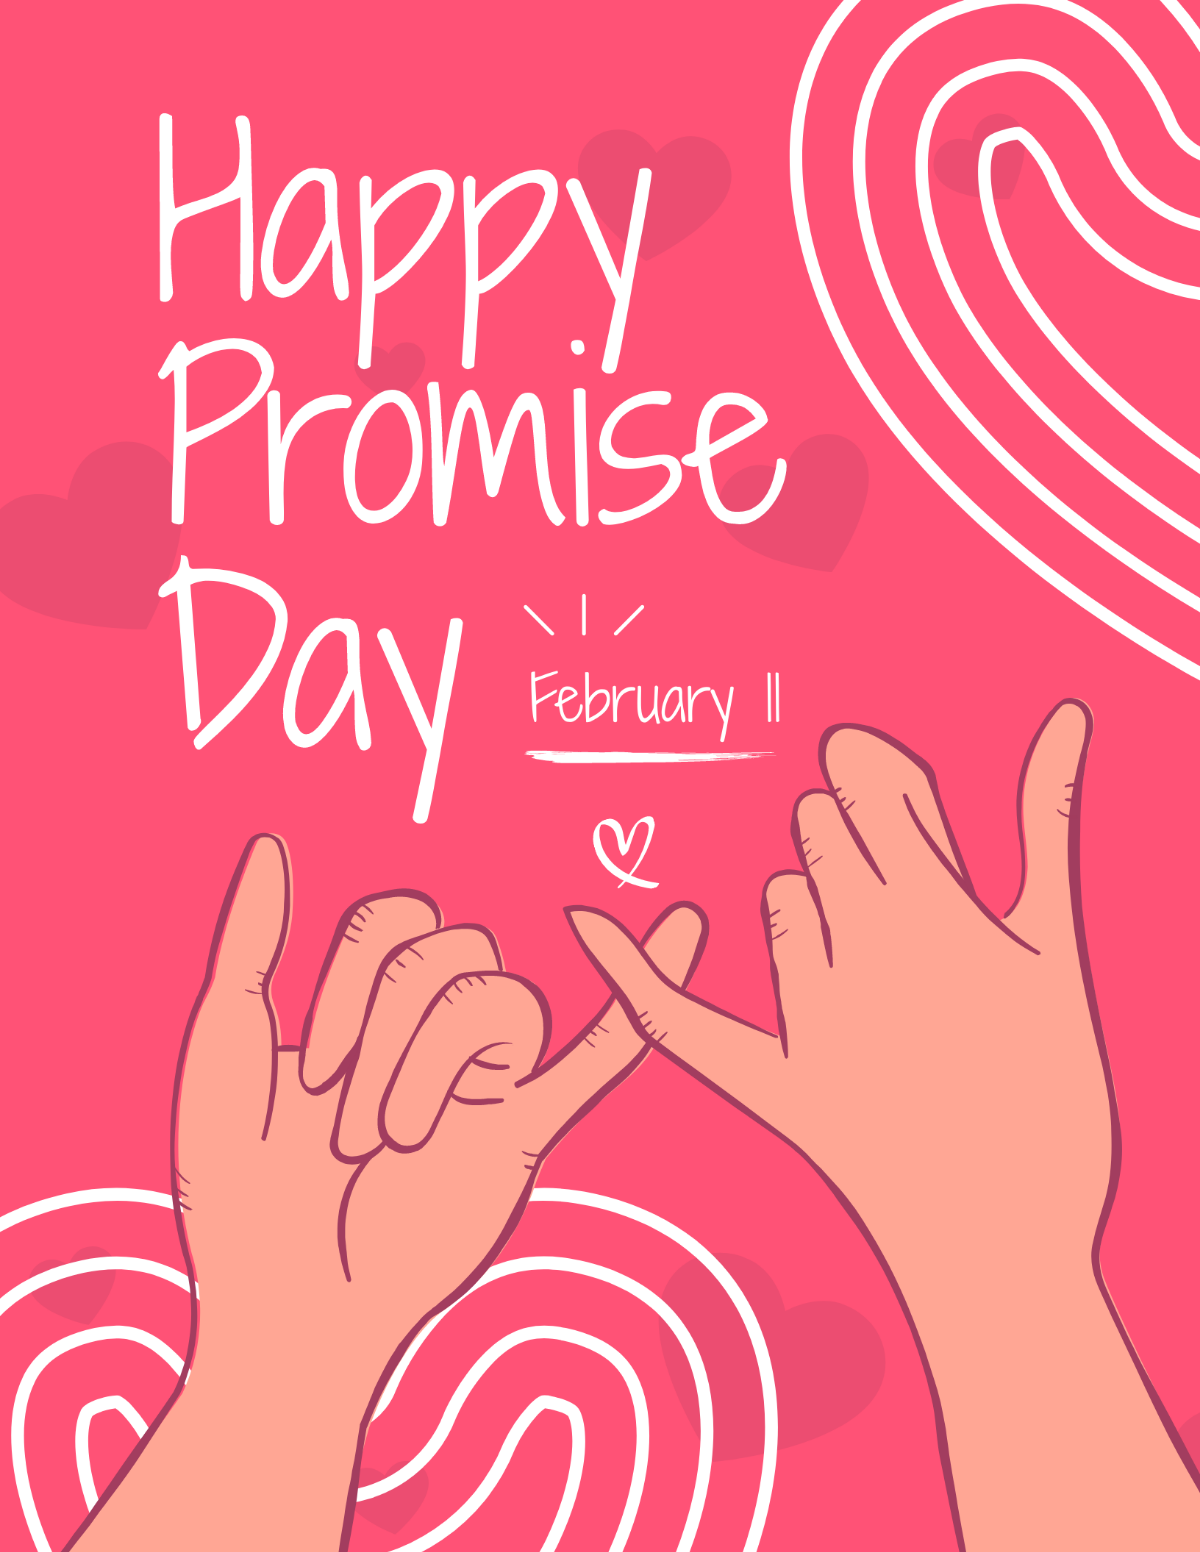 Free Happy Promise Day Flyer Template